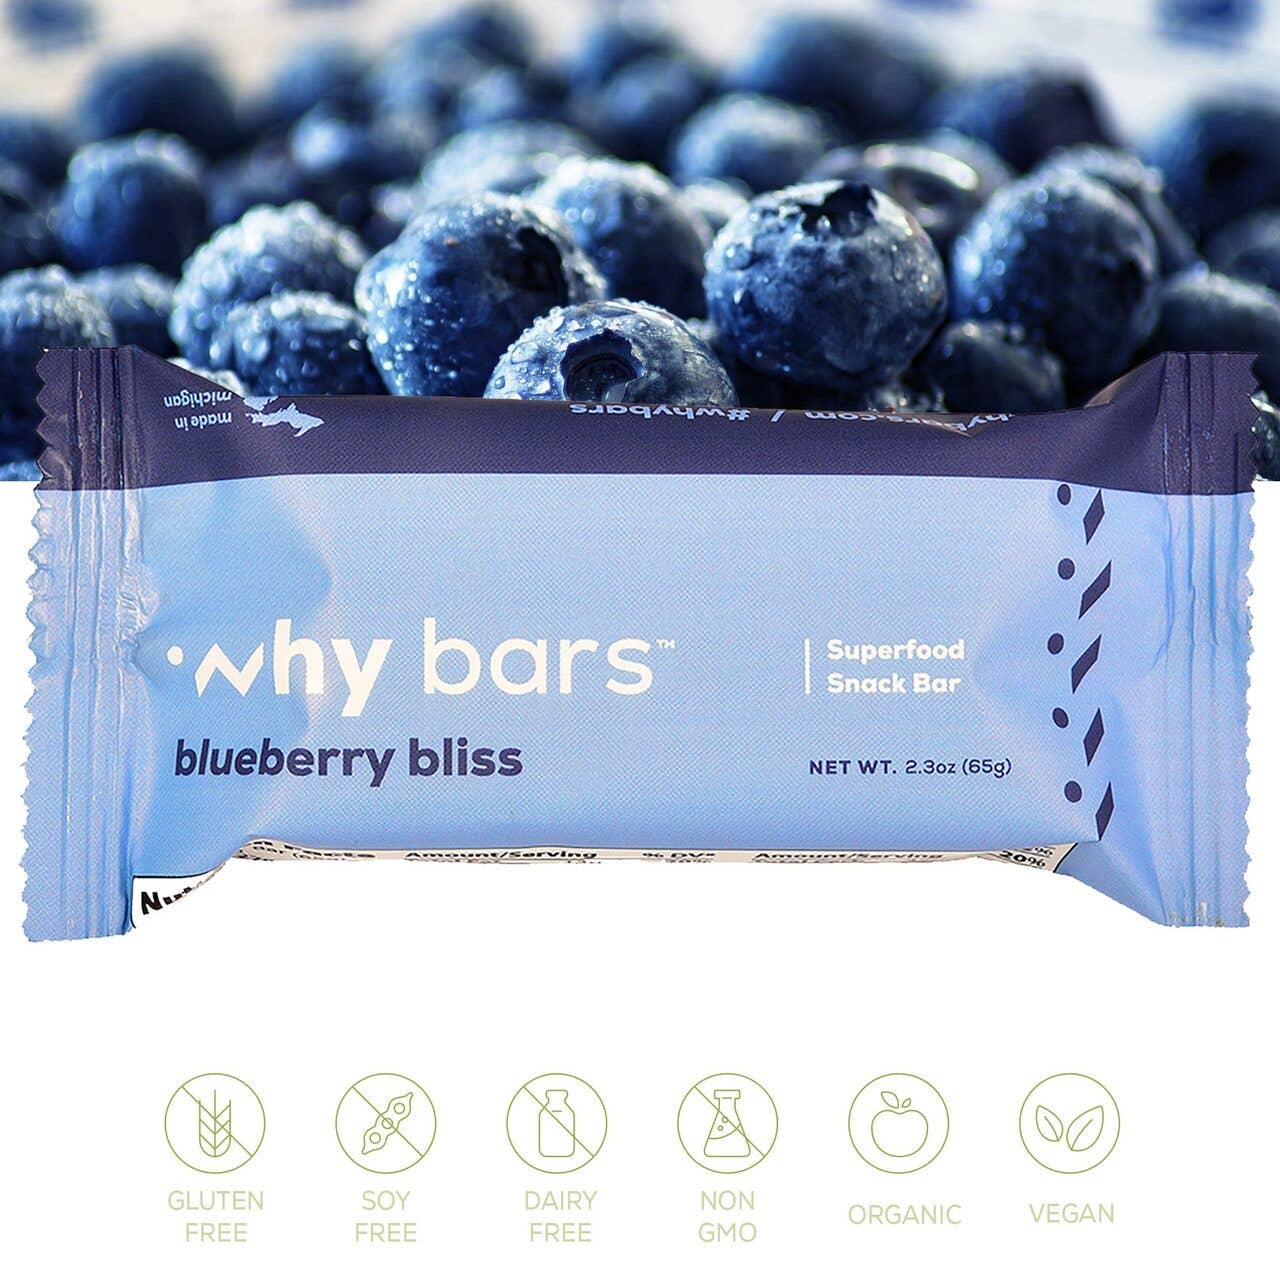 Blueberry Bliss Superfood Snack Bar: Gluten-Free